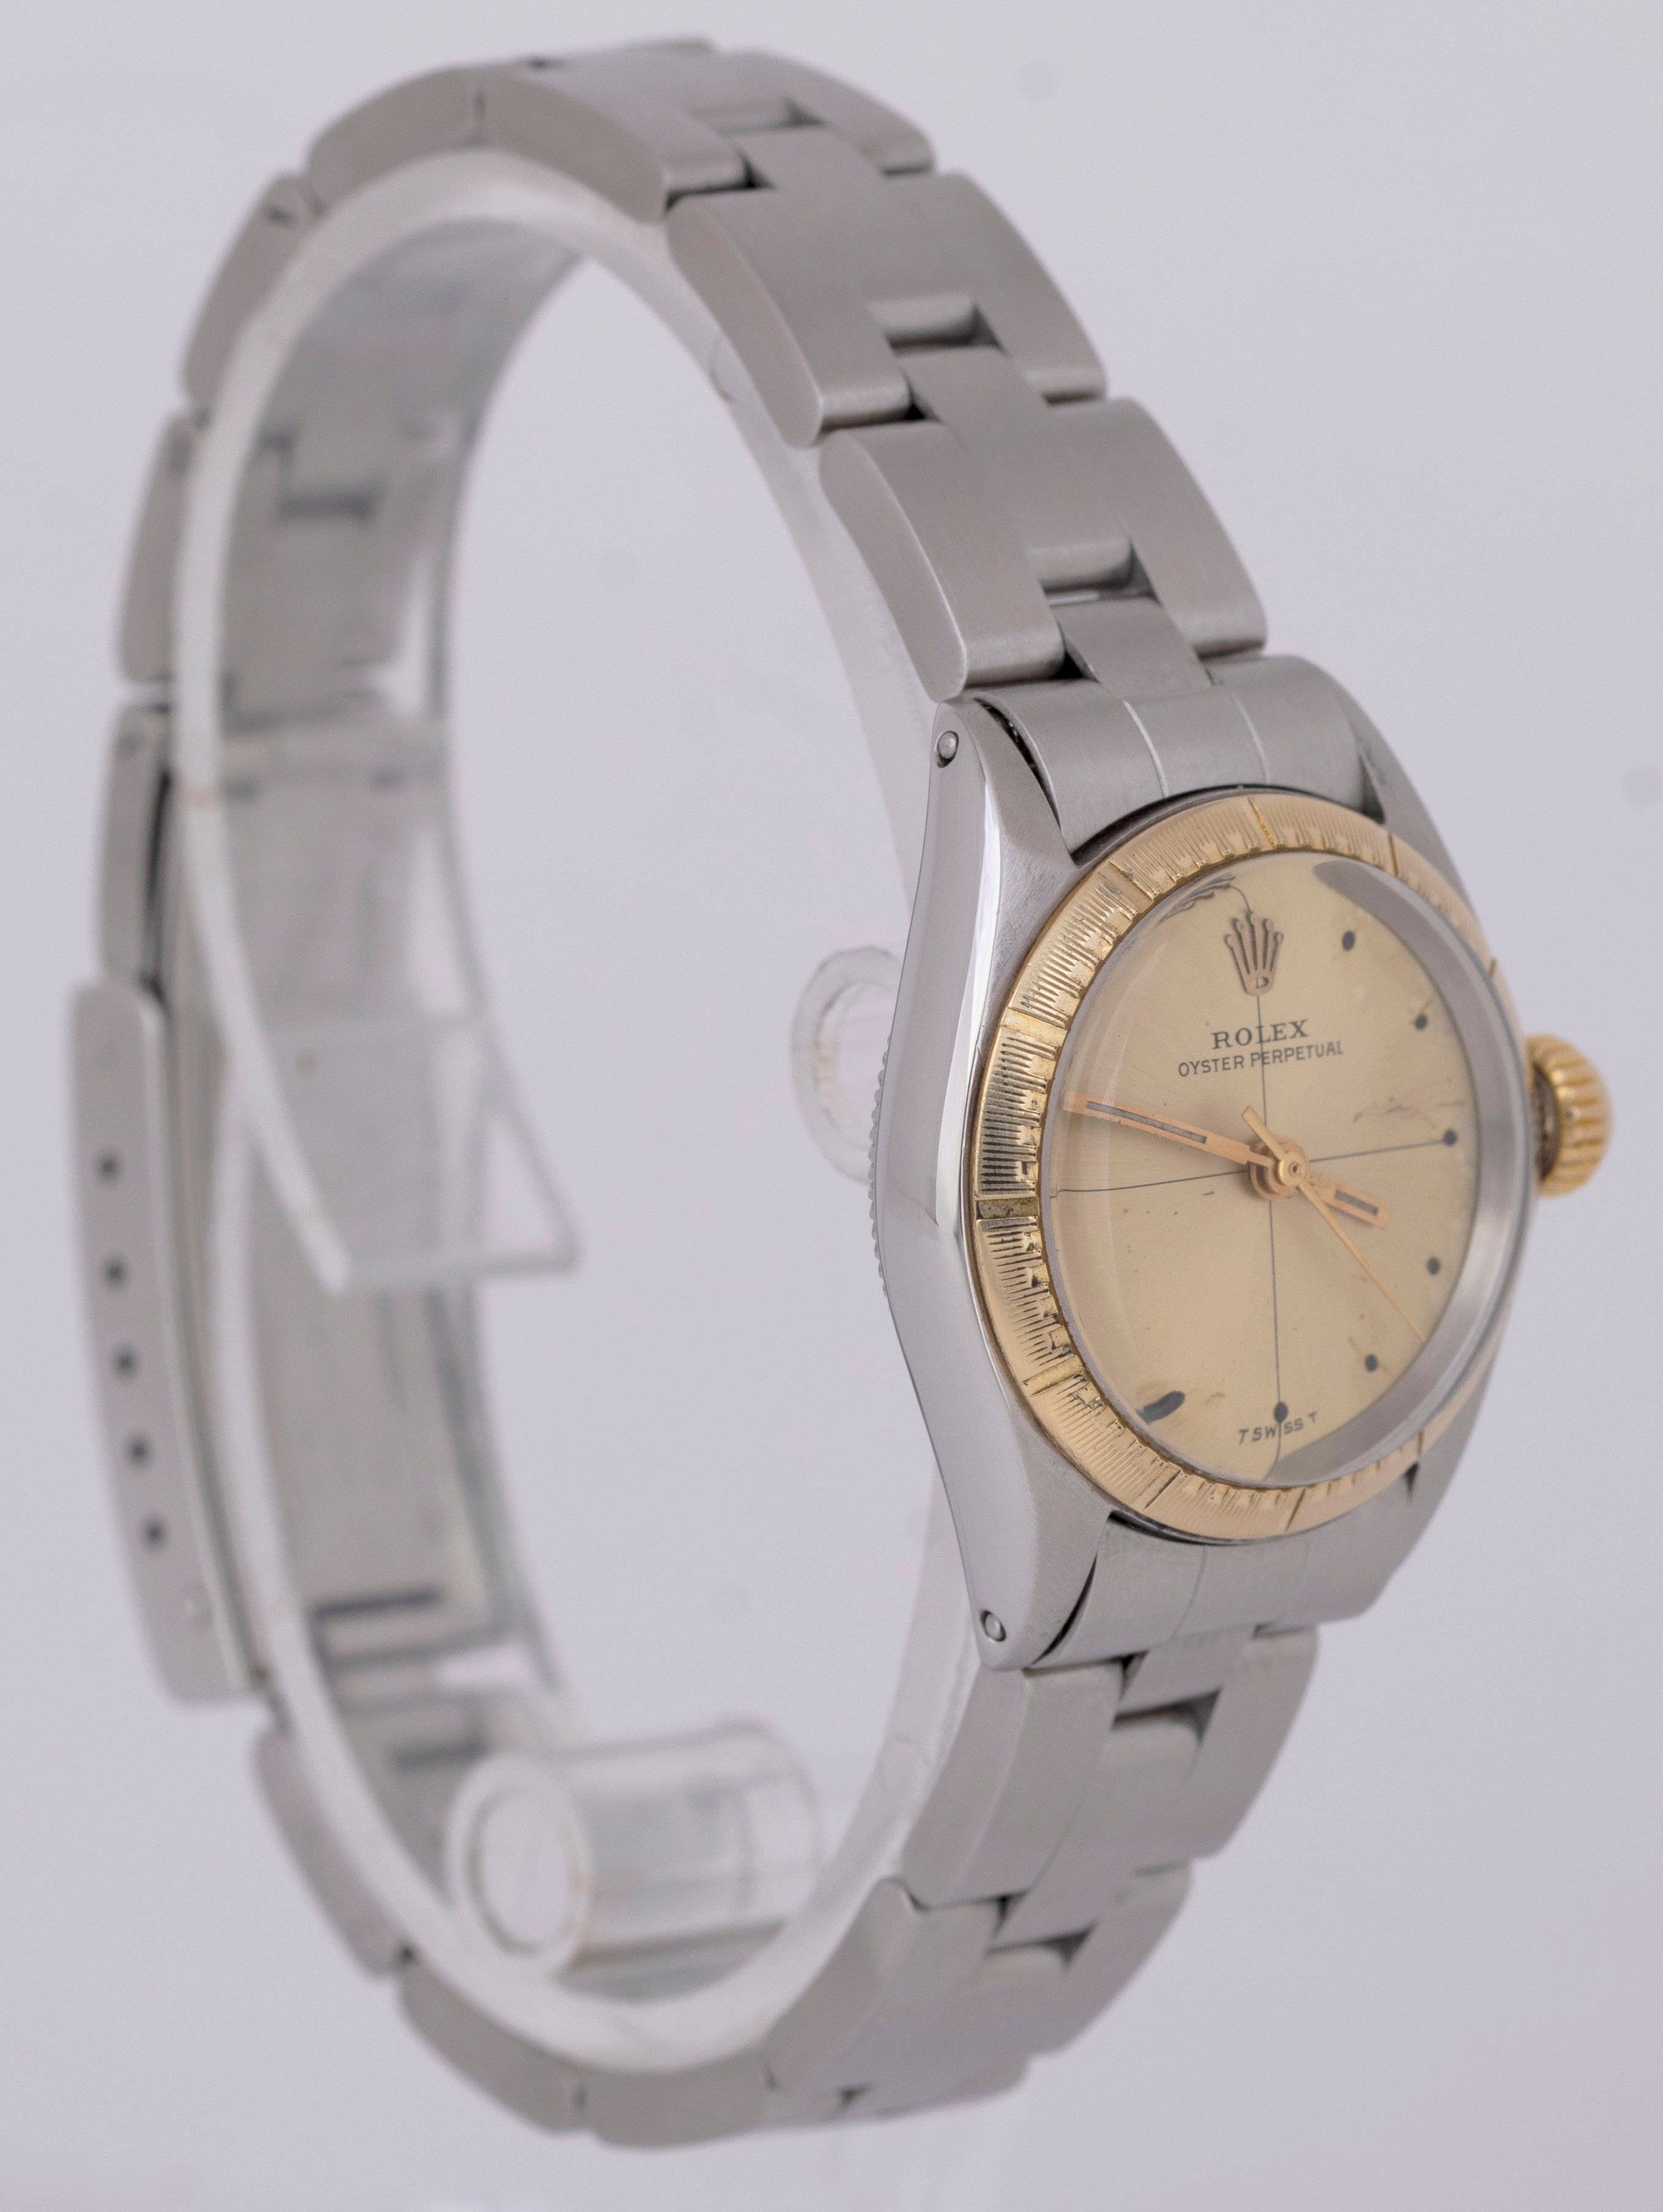 MINT PAPERS Ladies Rolex Oyster Perpetual 24mm ZEPHYR Two-Tone Watch 6804 B+P